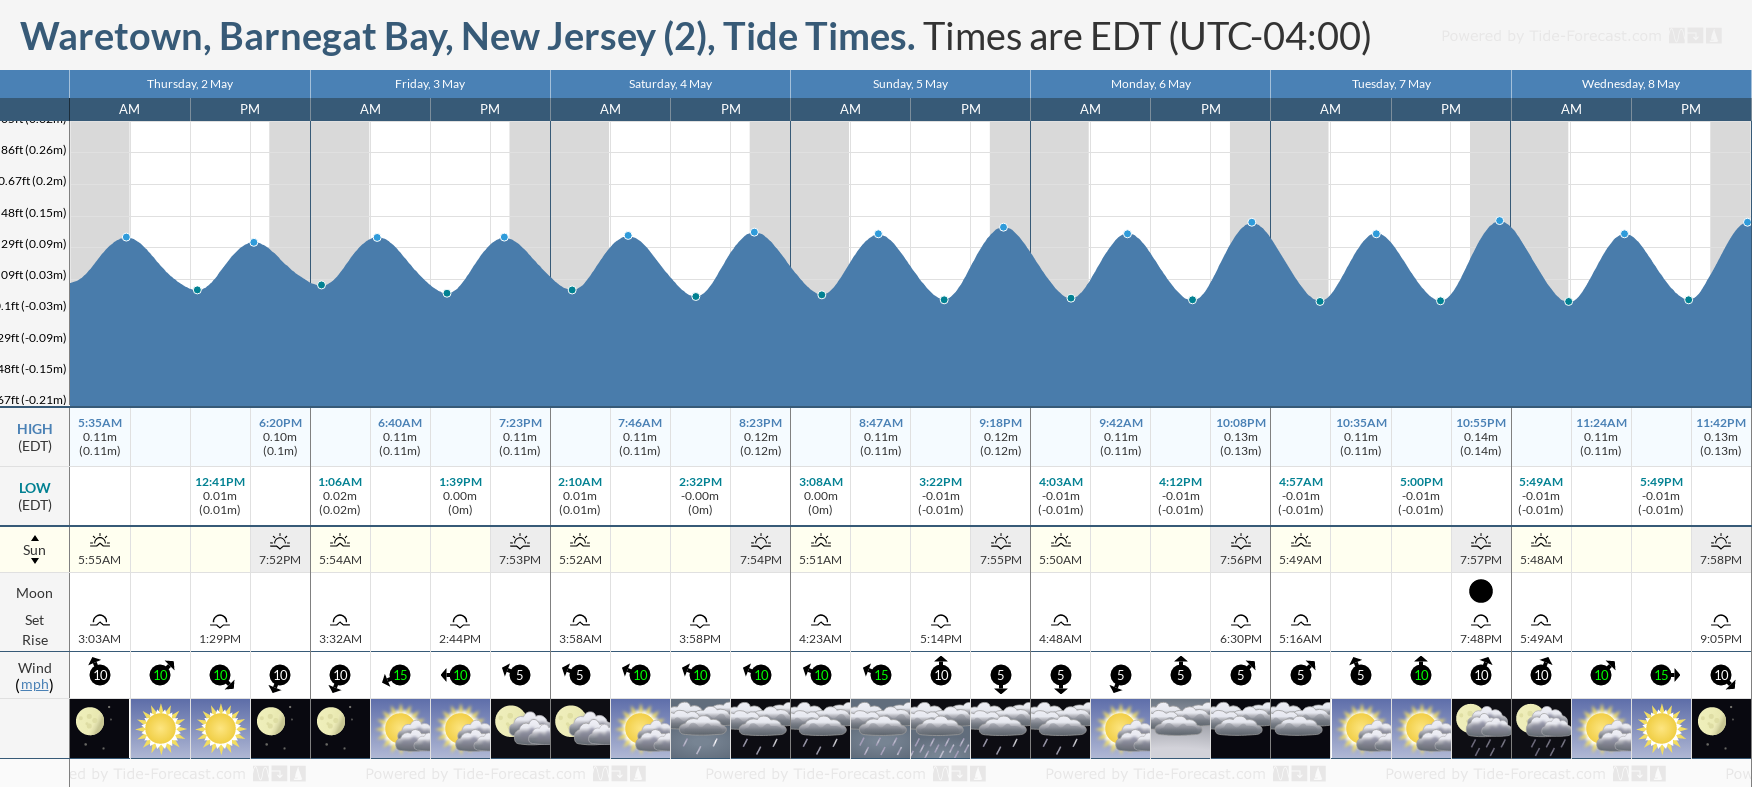 Waretown, Barnegat Bay, New Jersey (2) Tide Chart including high and low tide tide times for the next 7 days